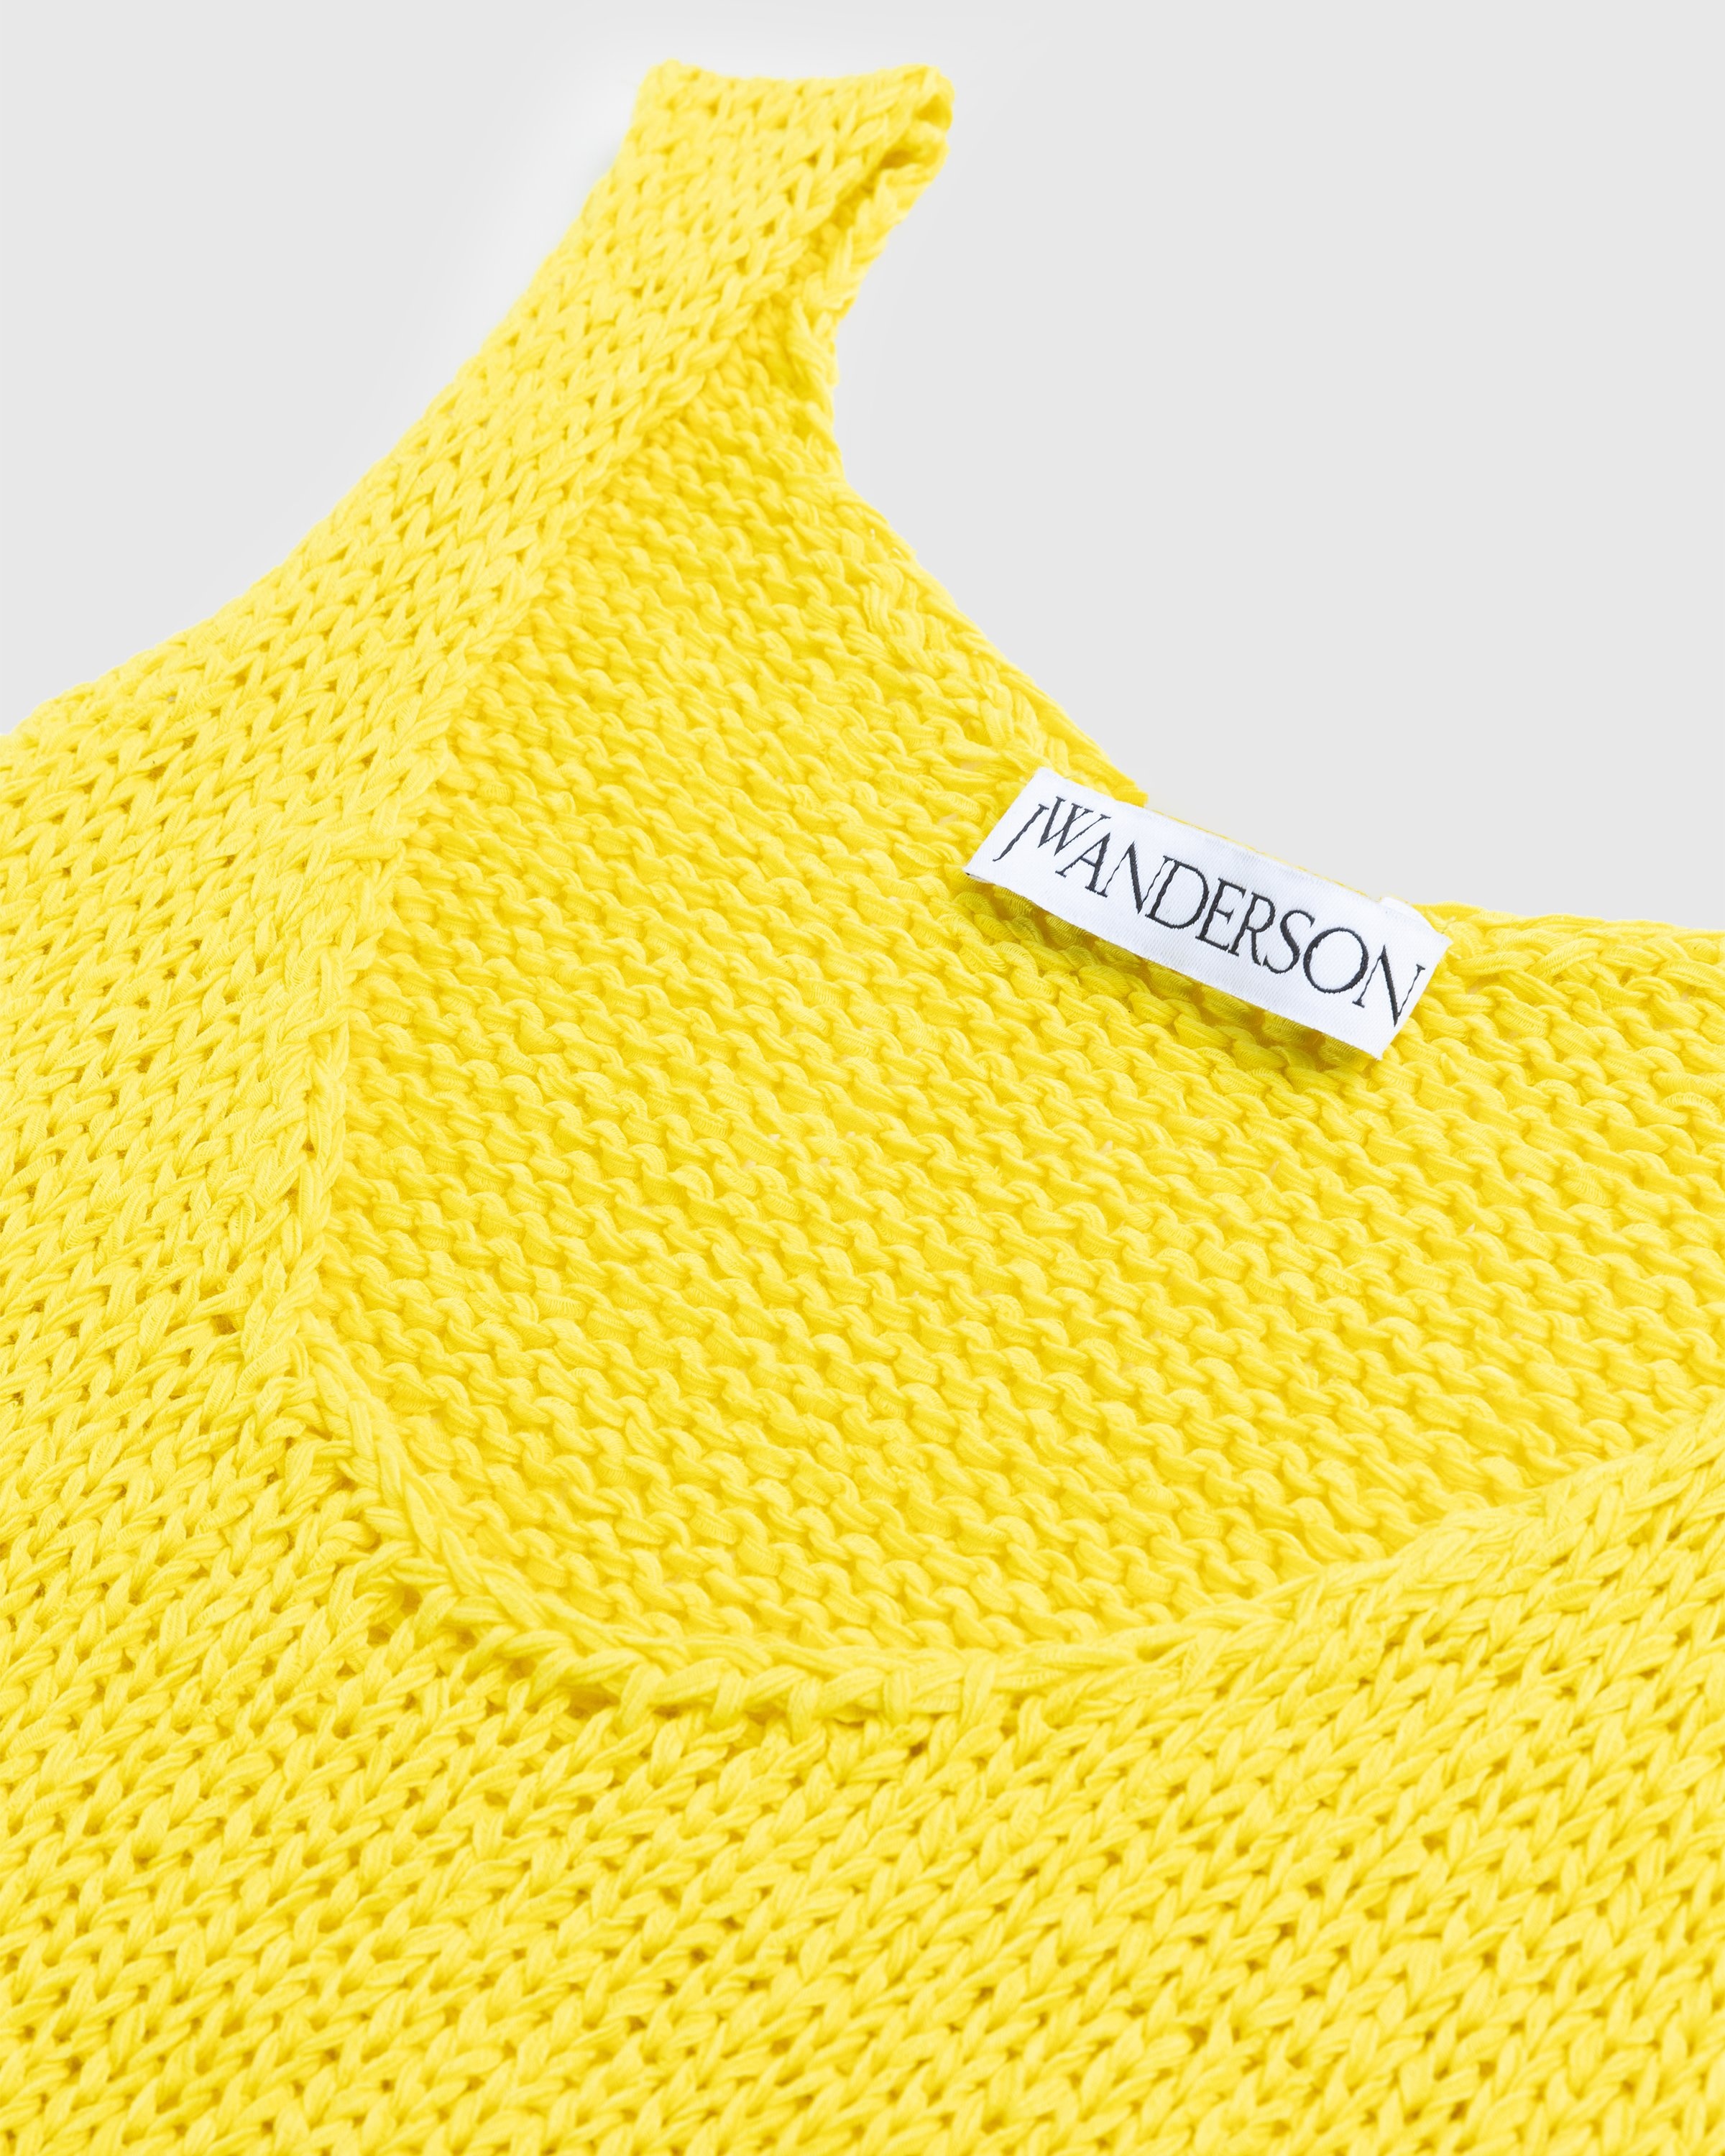 J.W. Anderson – Apple Tank Top Yellow - Tops - Yellow - Image 6